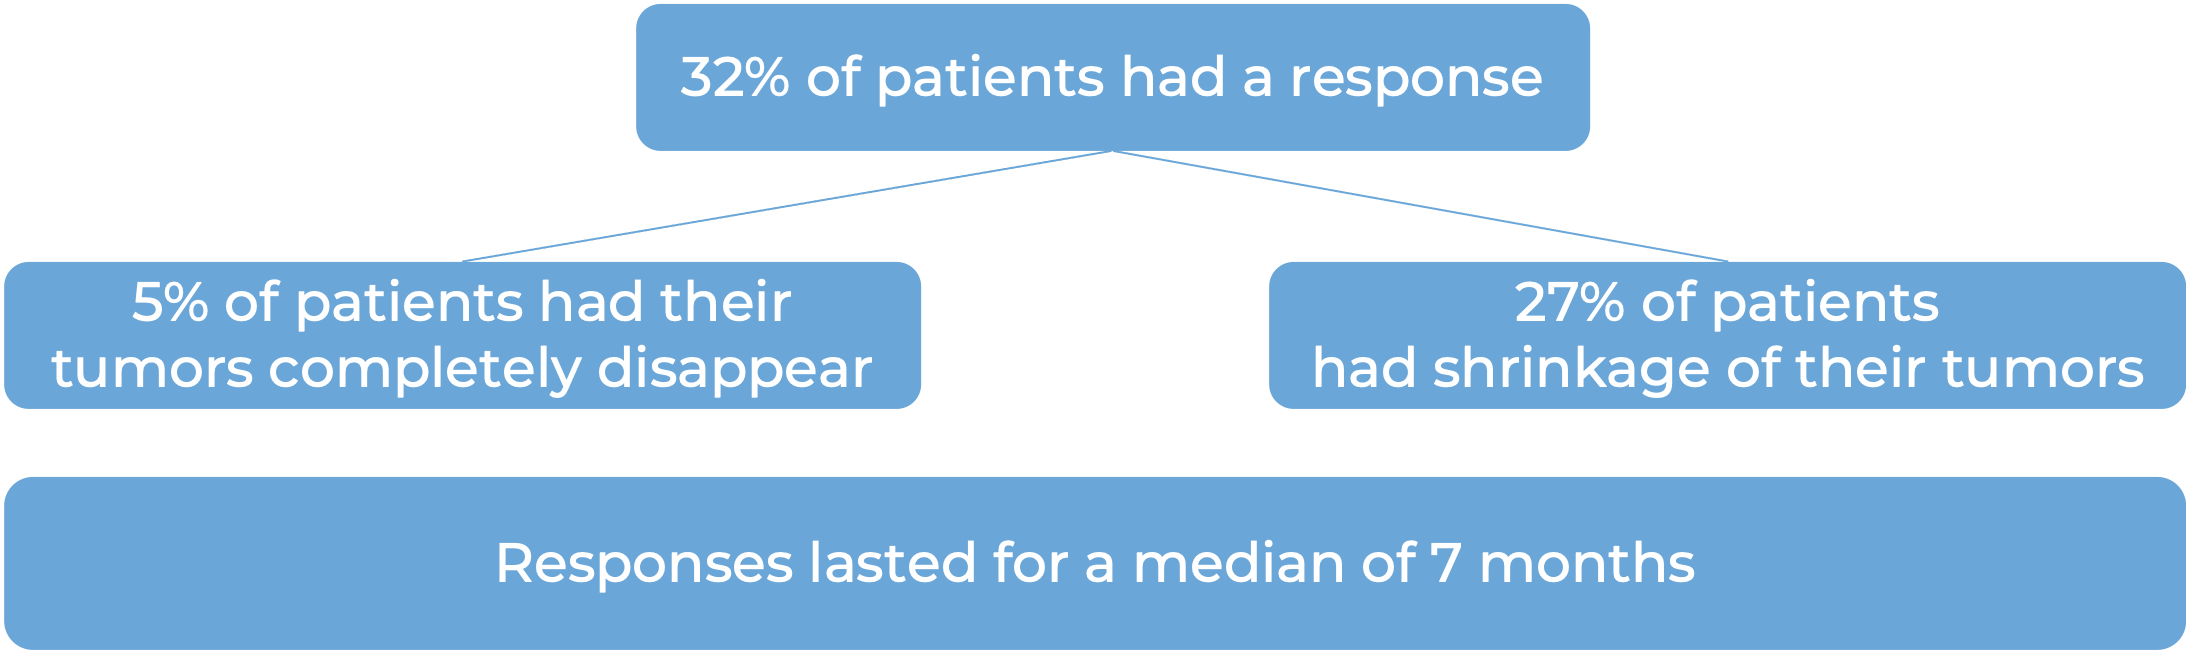 Results after treatment with Elahere (diagram)